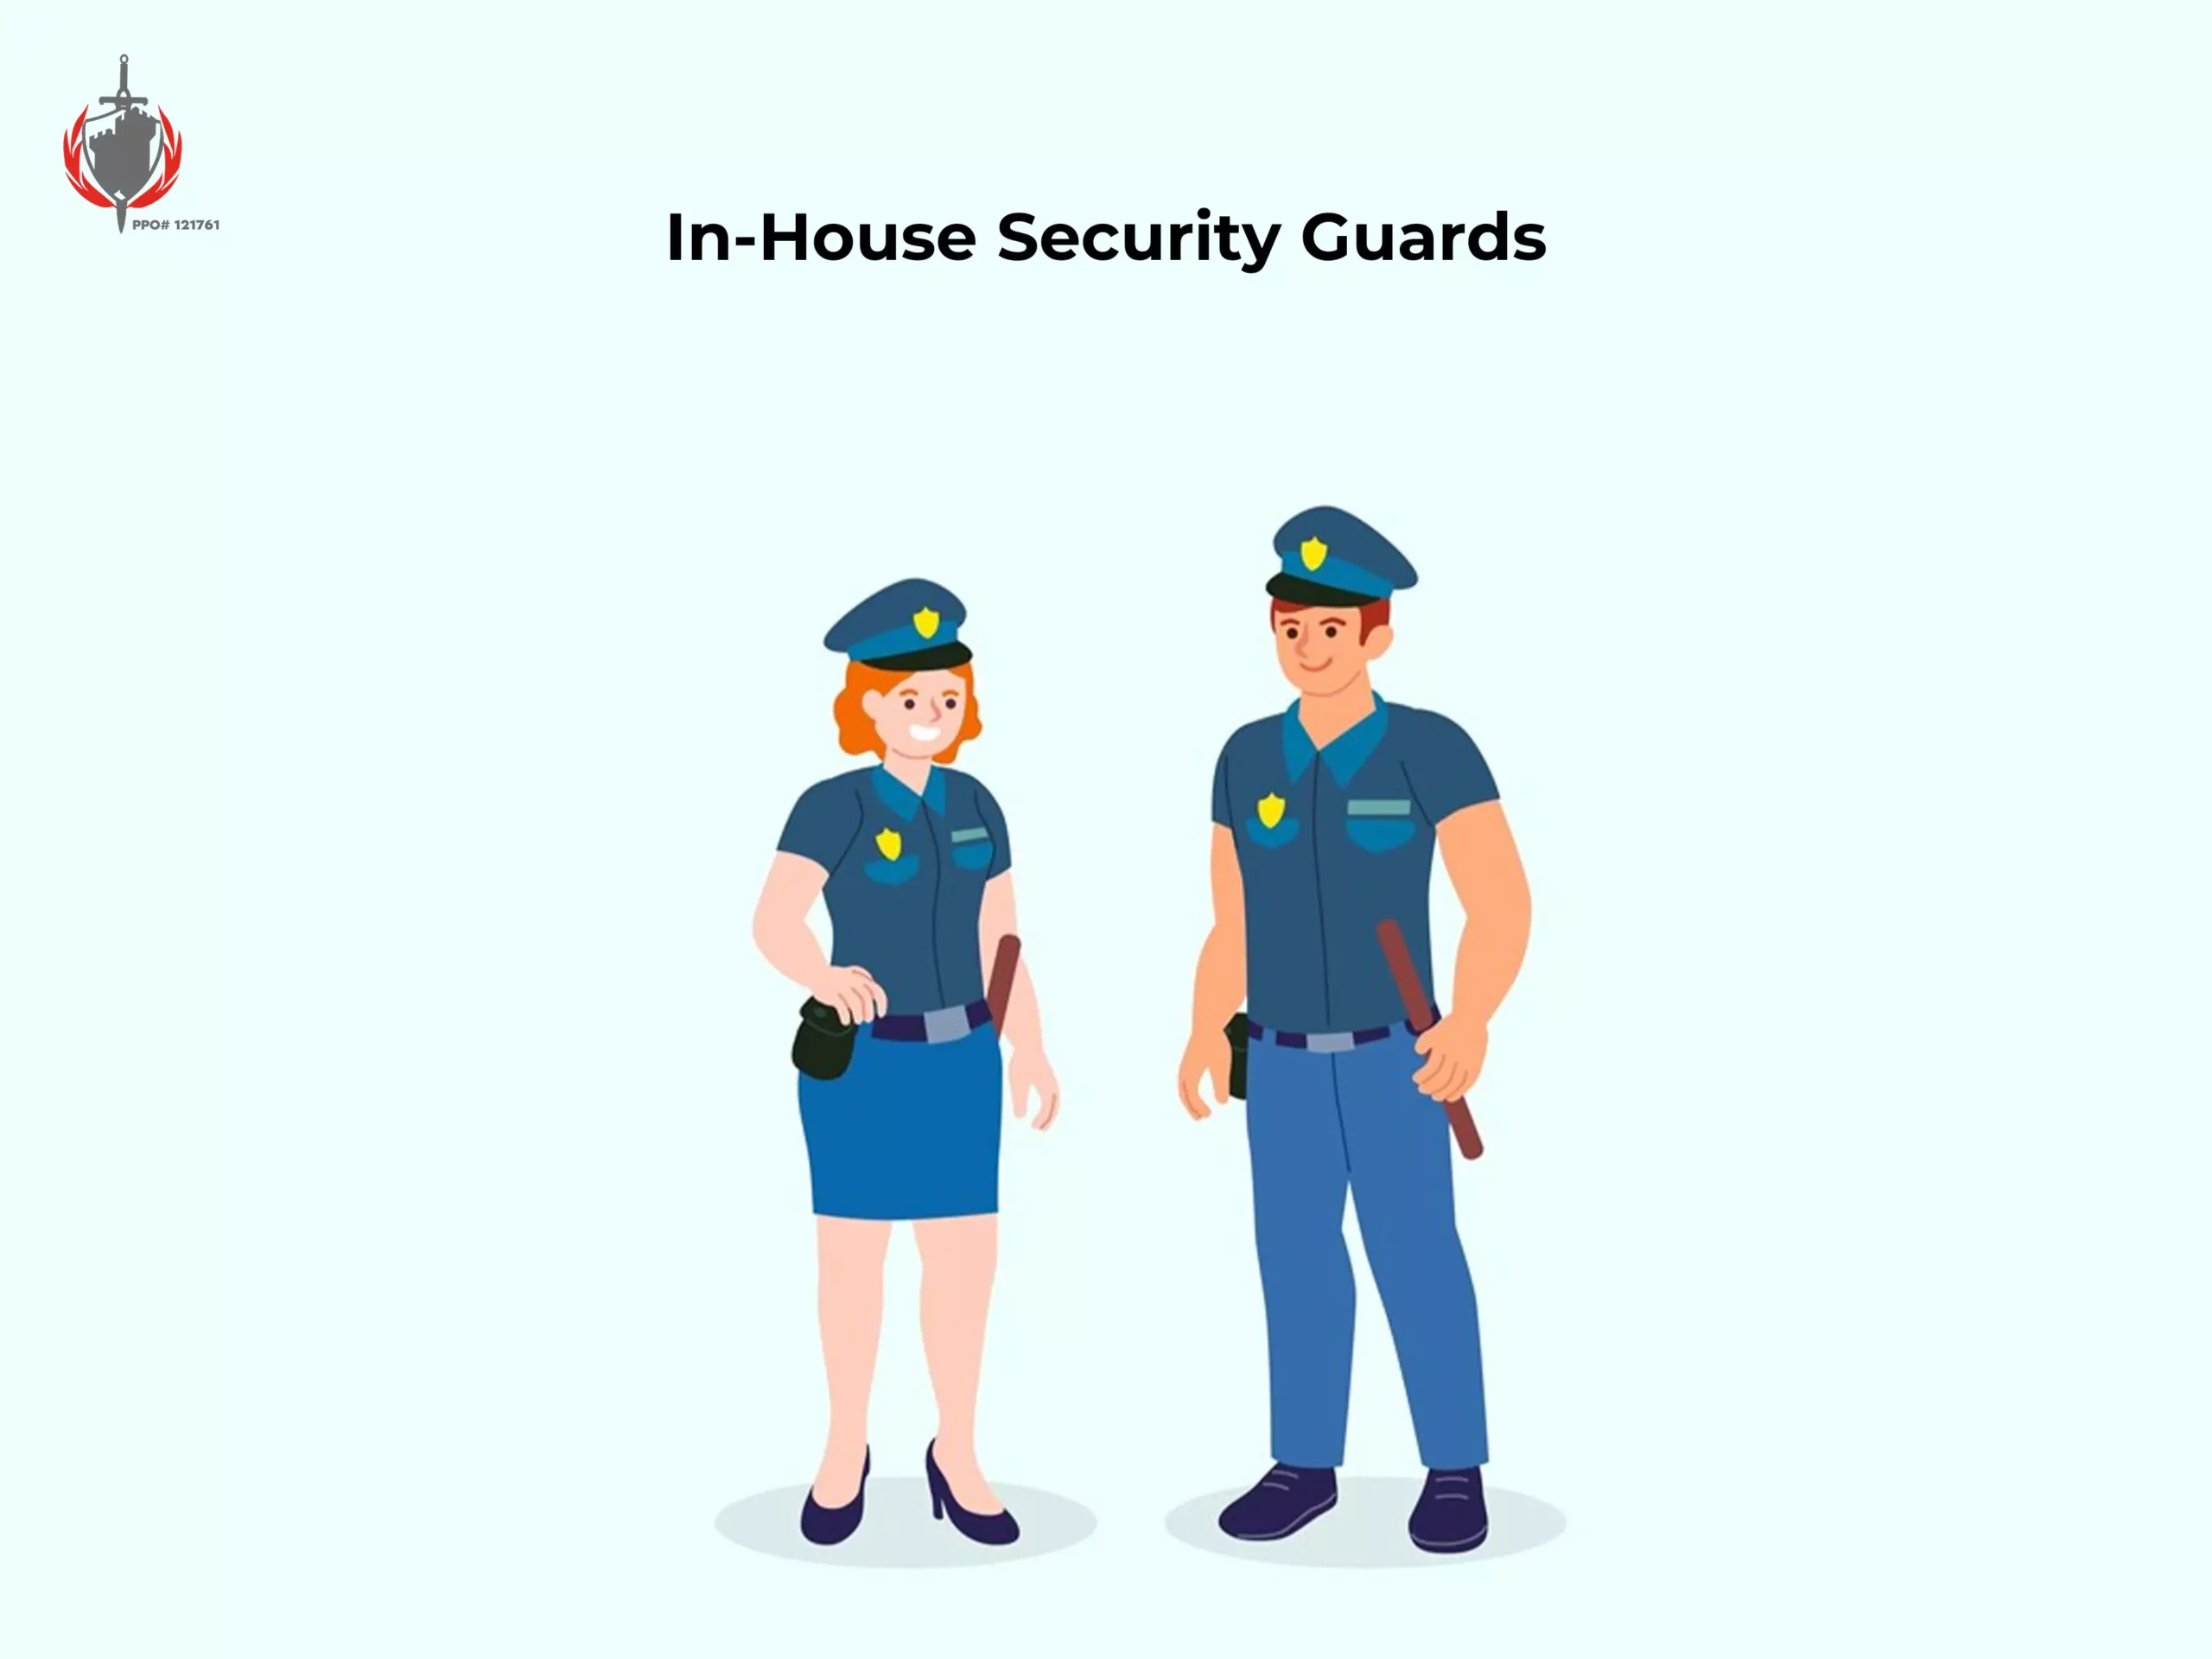 In-House Security Guards